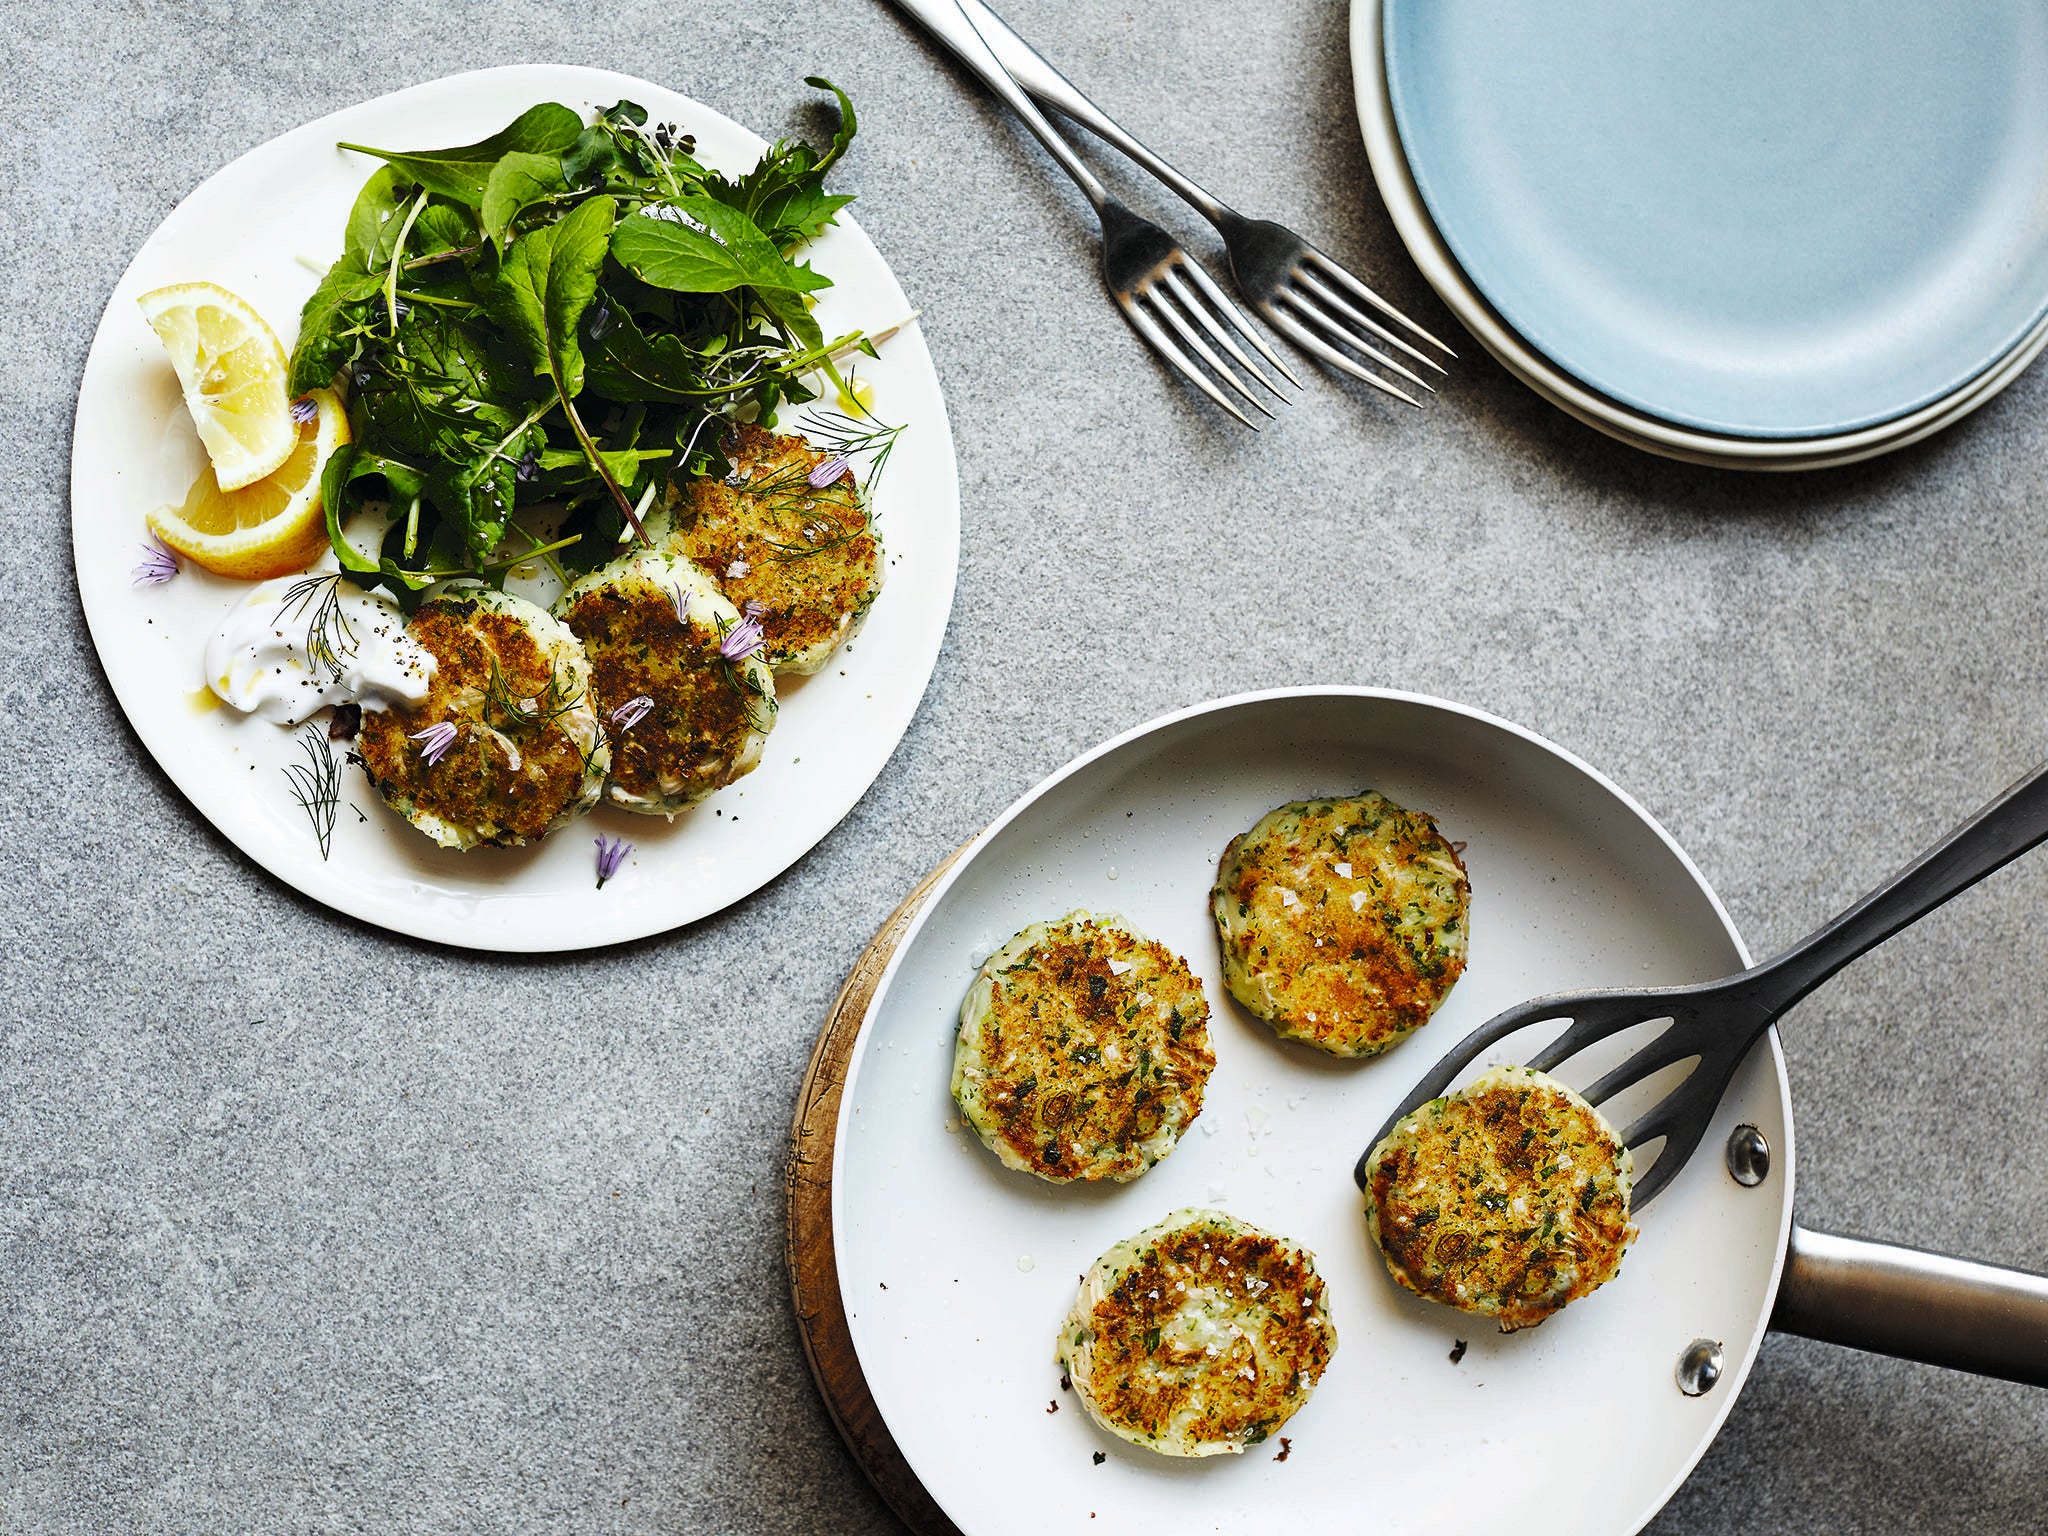 The no-fish cakes recipe from the book